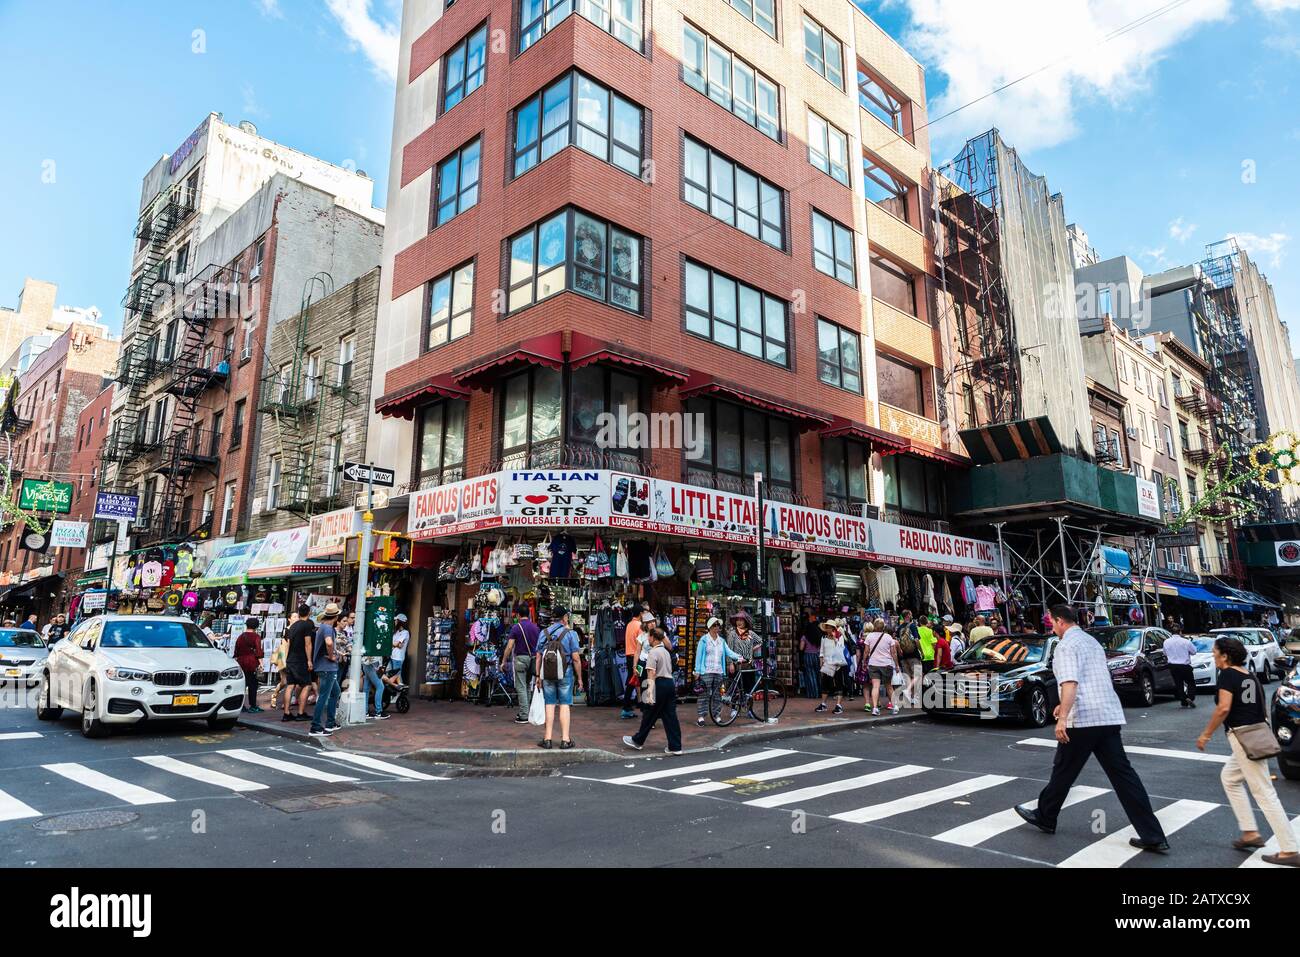 New York City, USA - August 2, 2018: Street with many shops with people around in Little Italy, Lower Manhattan, New York City, USA Stock Photo